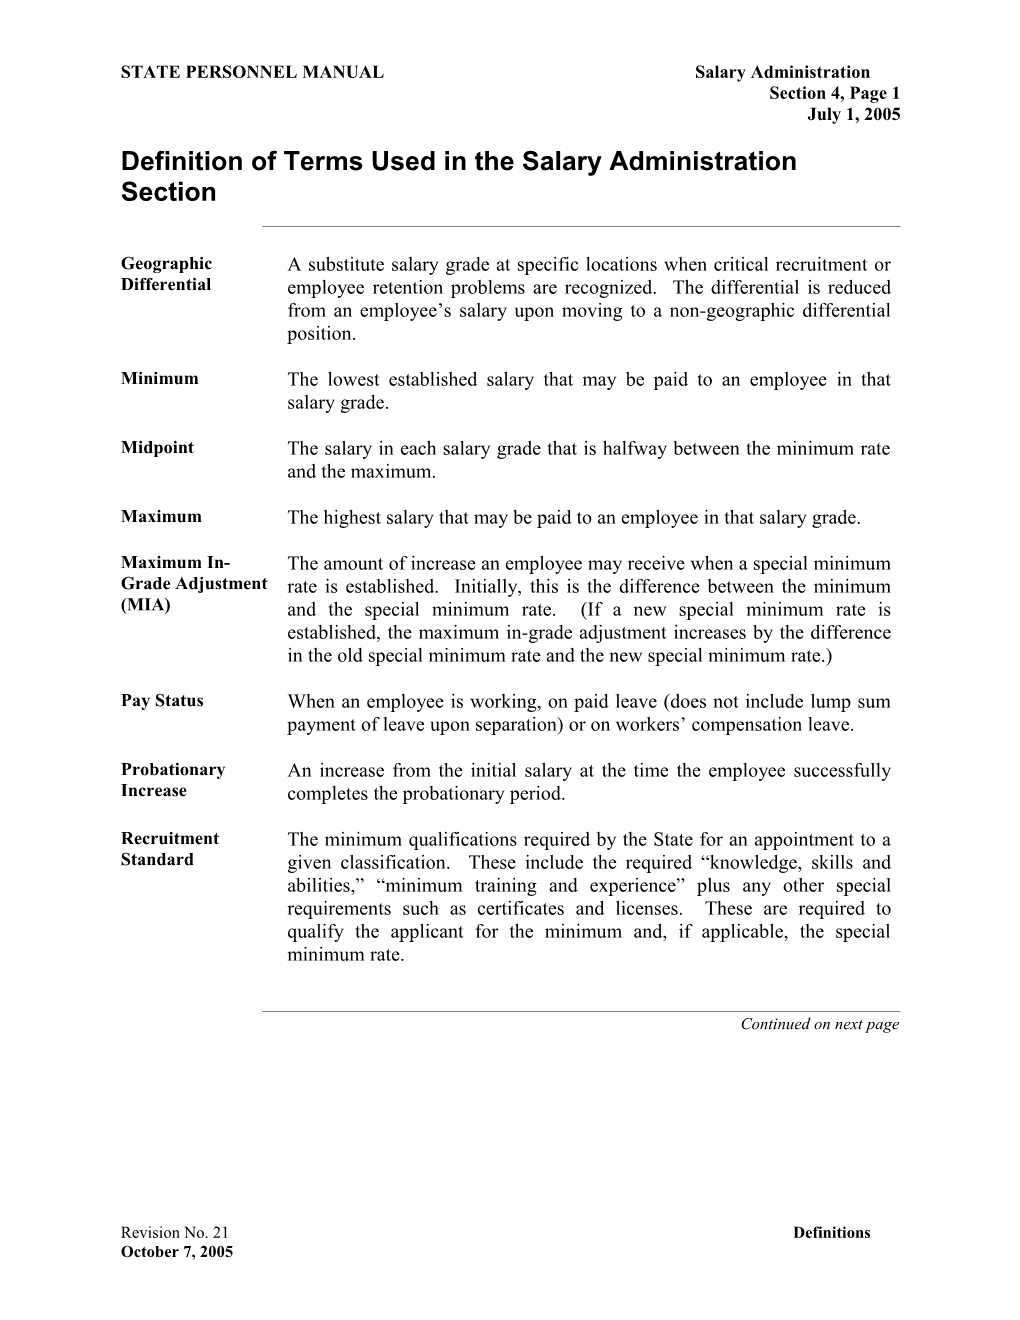 Definition of Terms Used in the Salary Administration Section